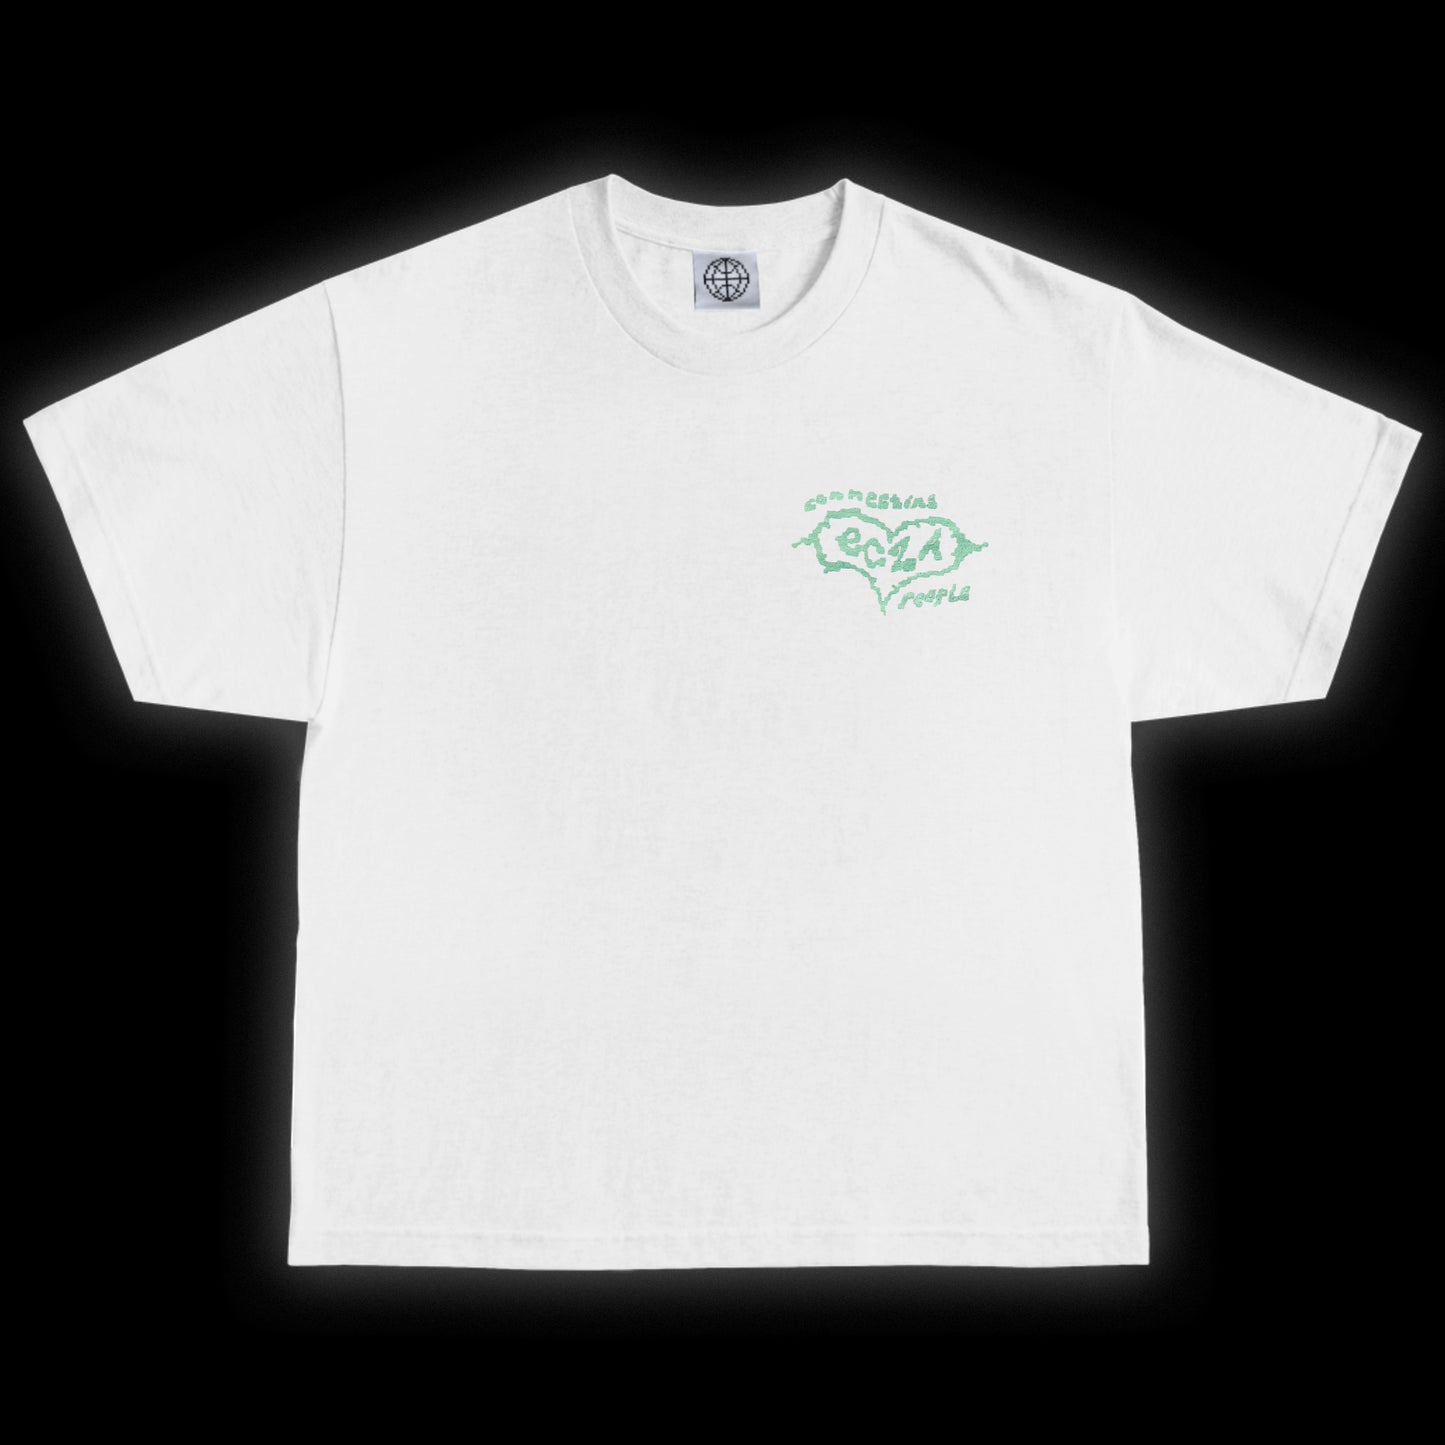 "Connecting People" Tee - Off-White